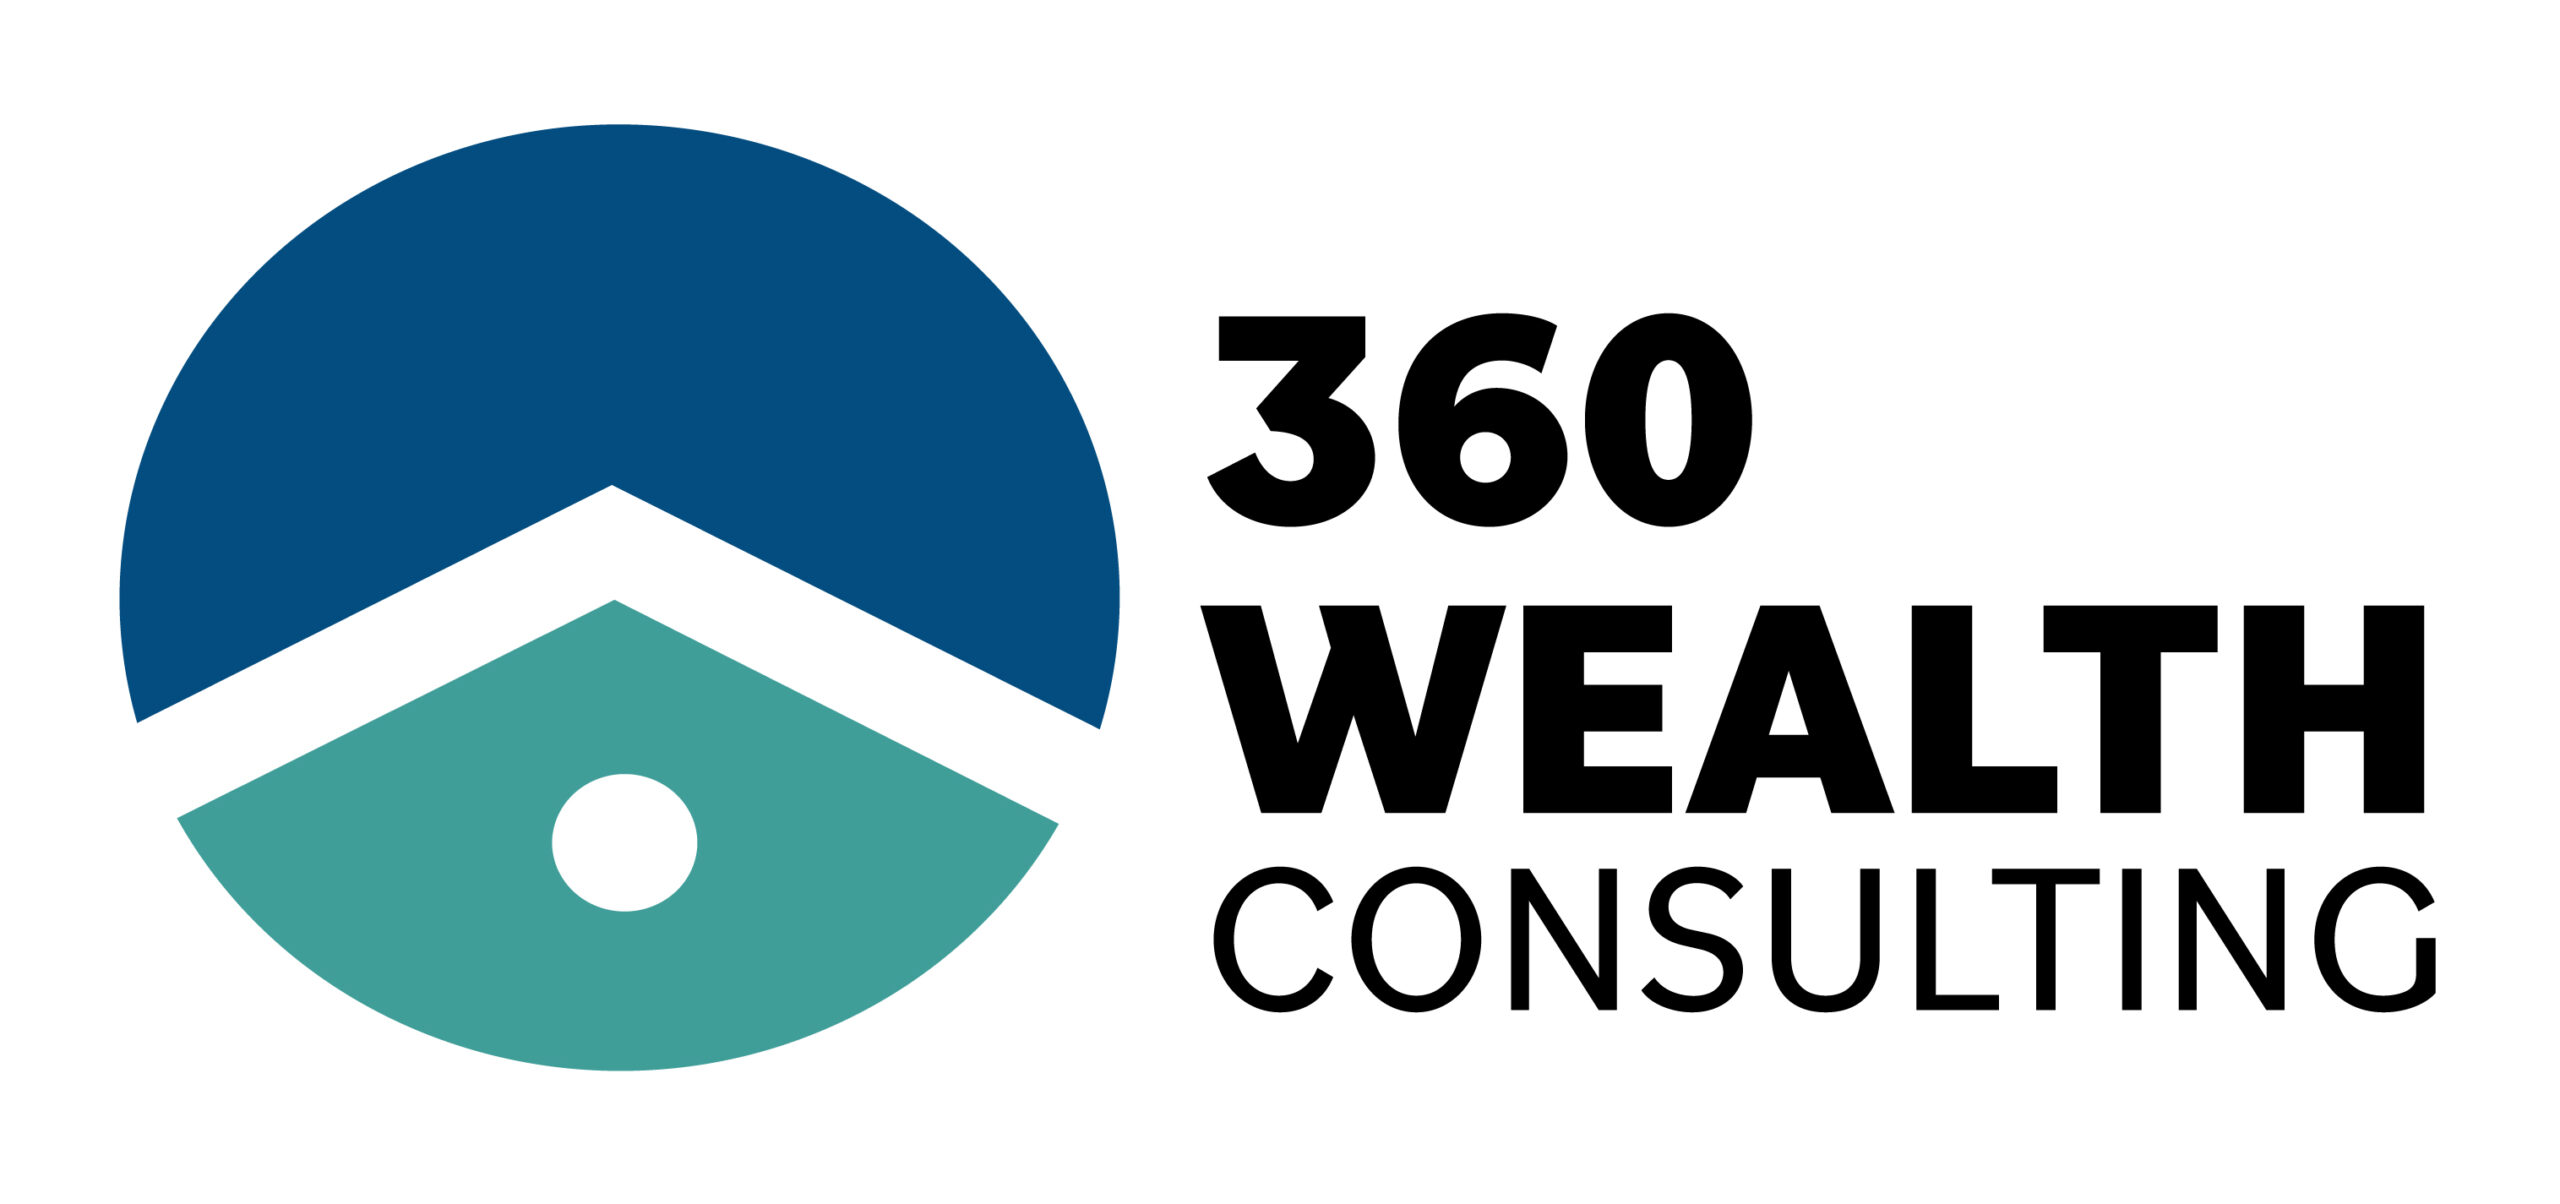 360 Wealth Consulting